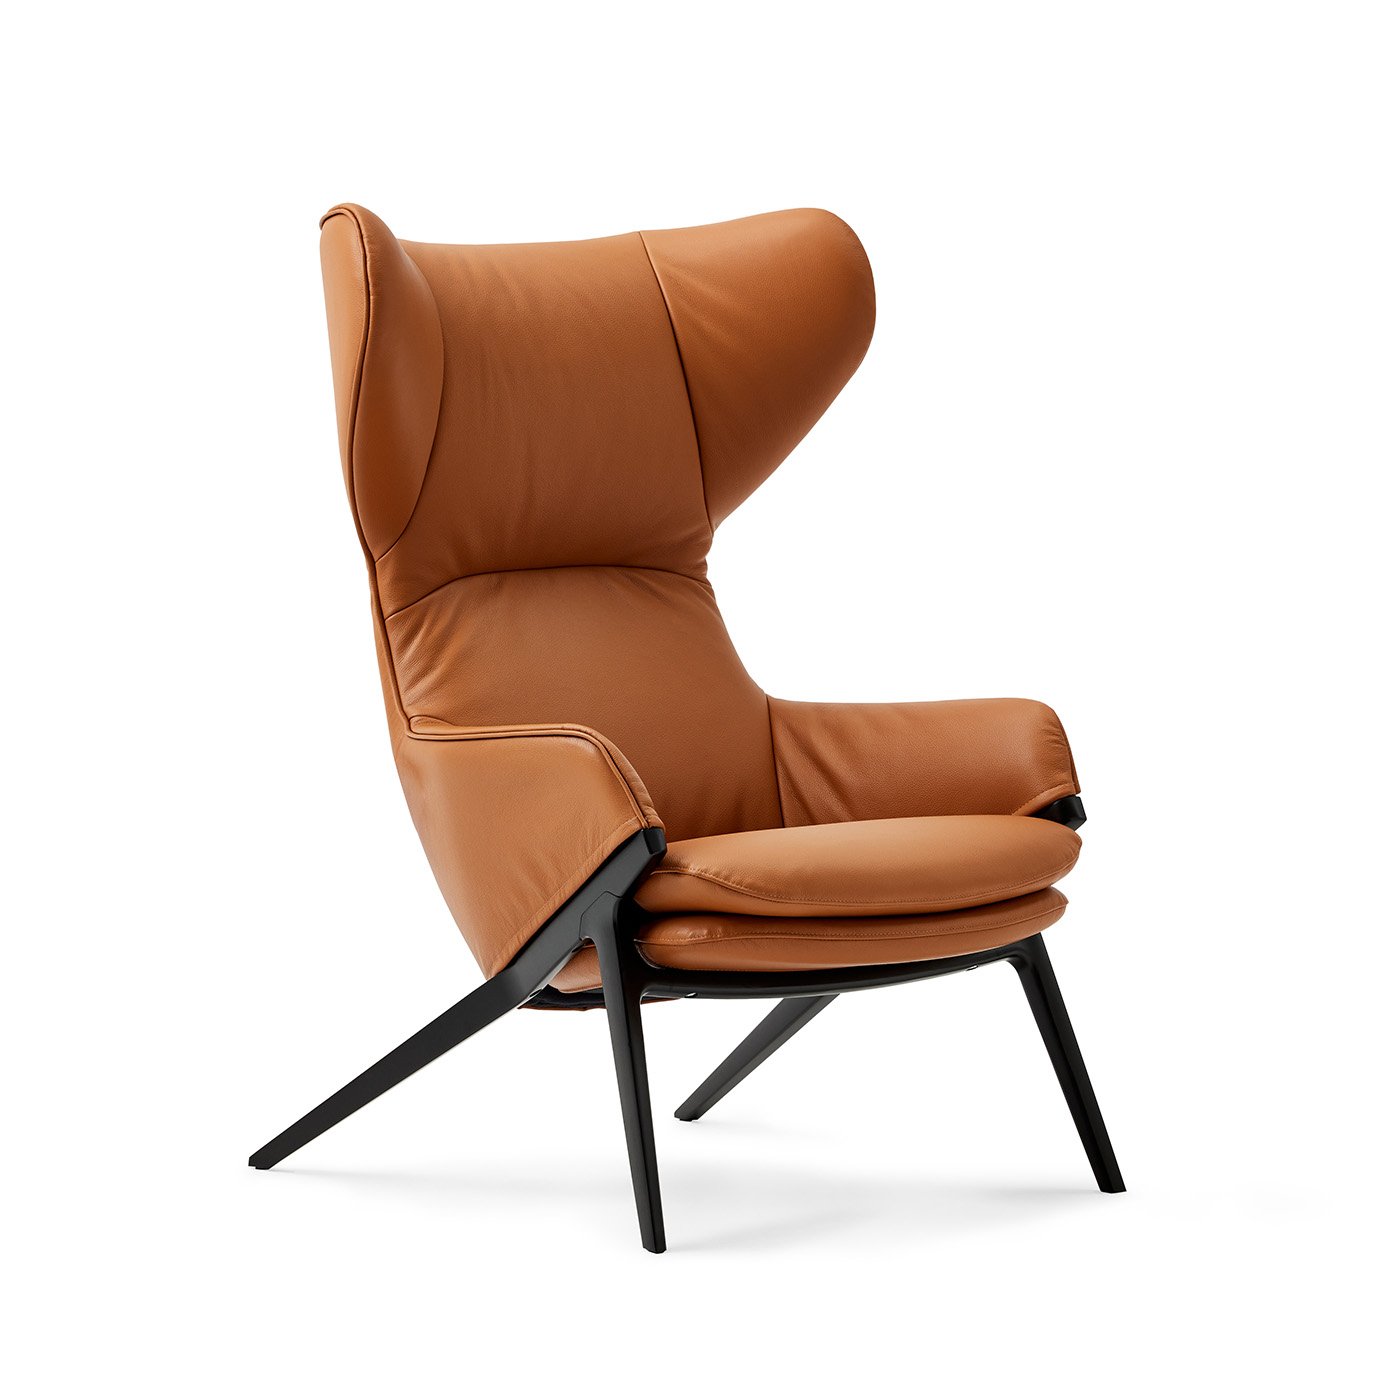 Detail front 3/4 shot of the P22 Lounge chair in Ambra